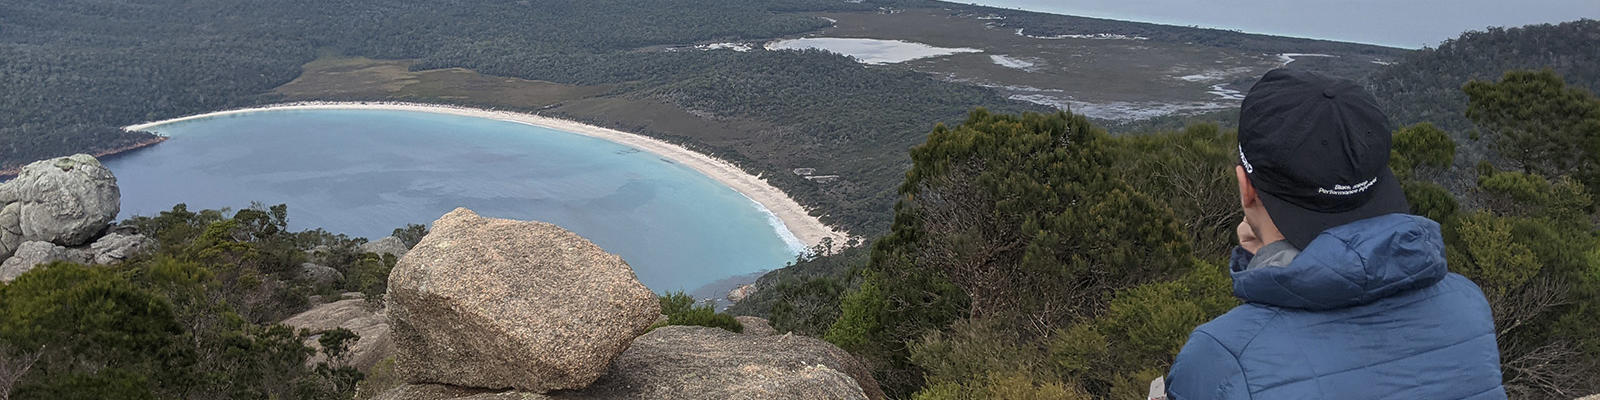 mt amos view over wineglass bay